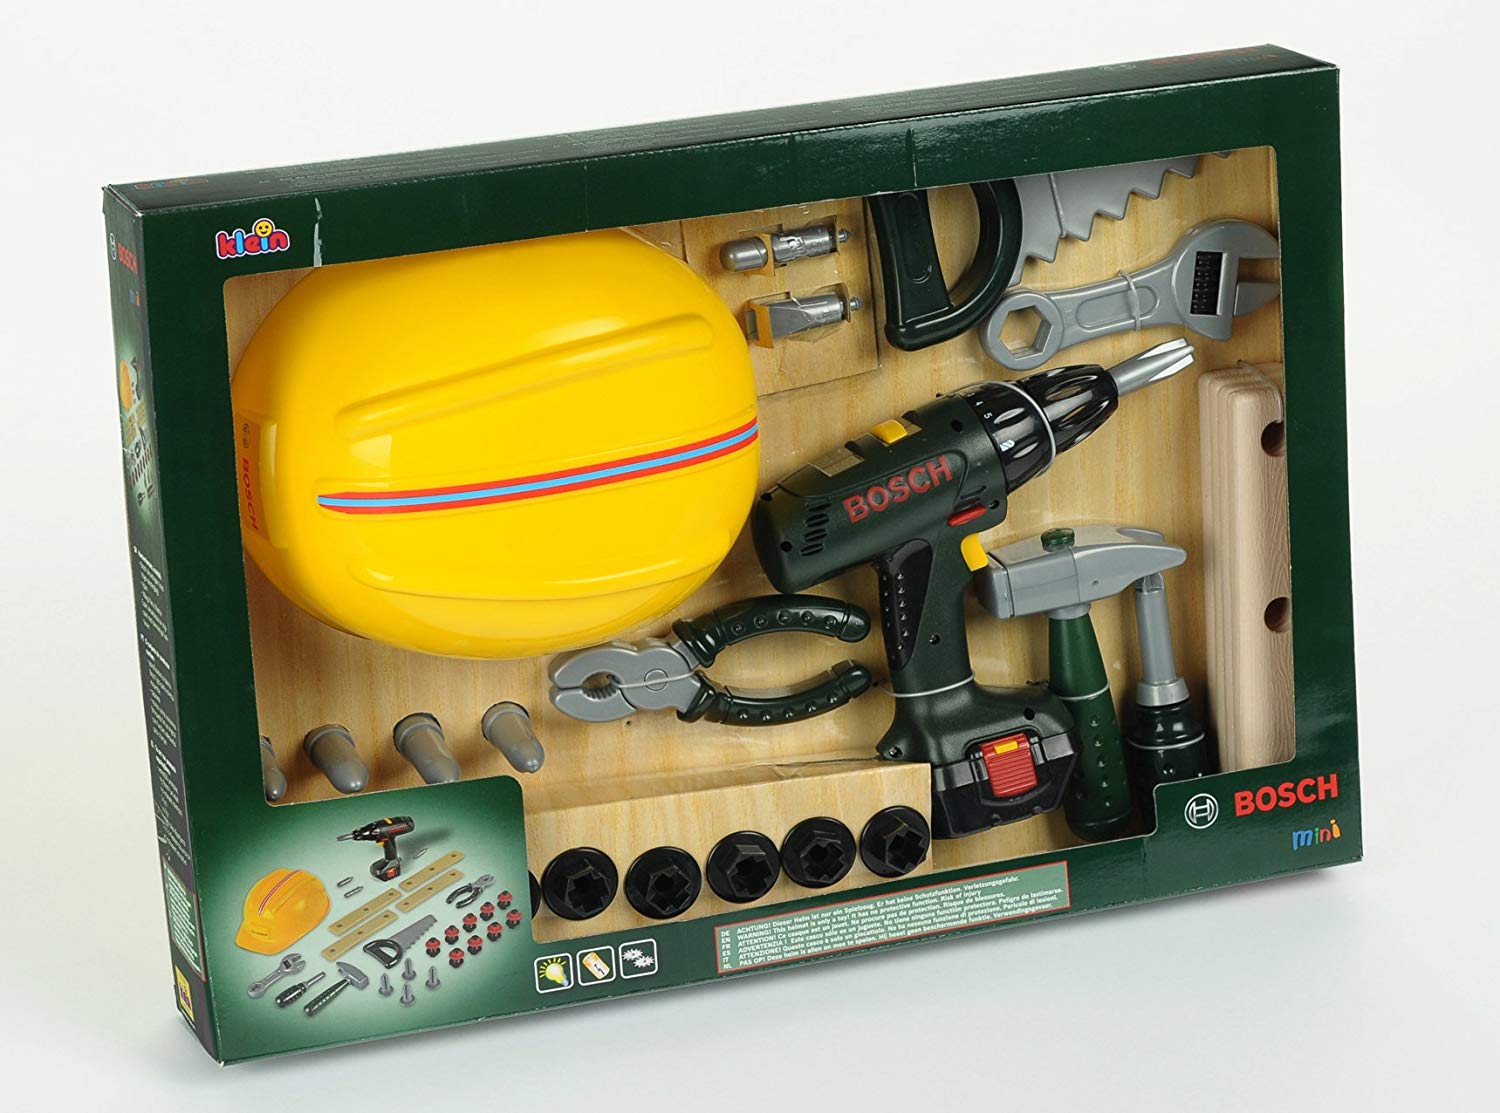 Bosch Toy Tool Set With Accessories